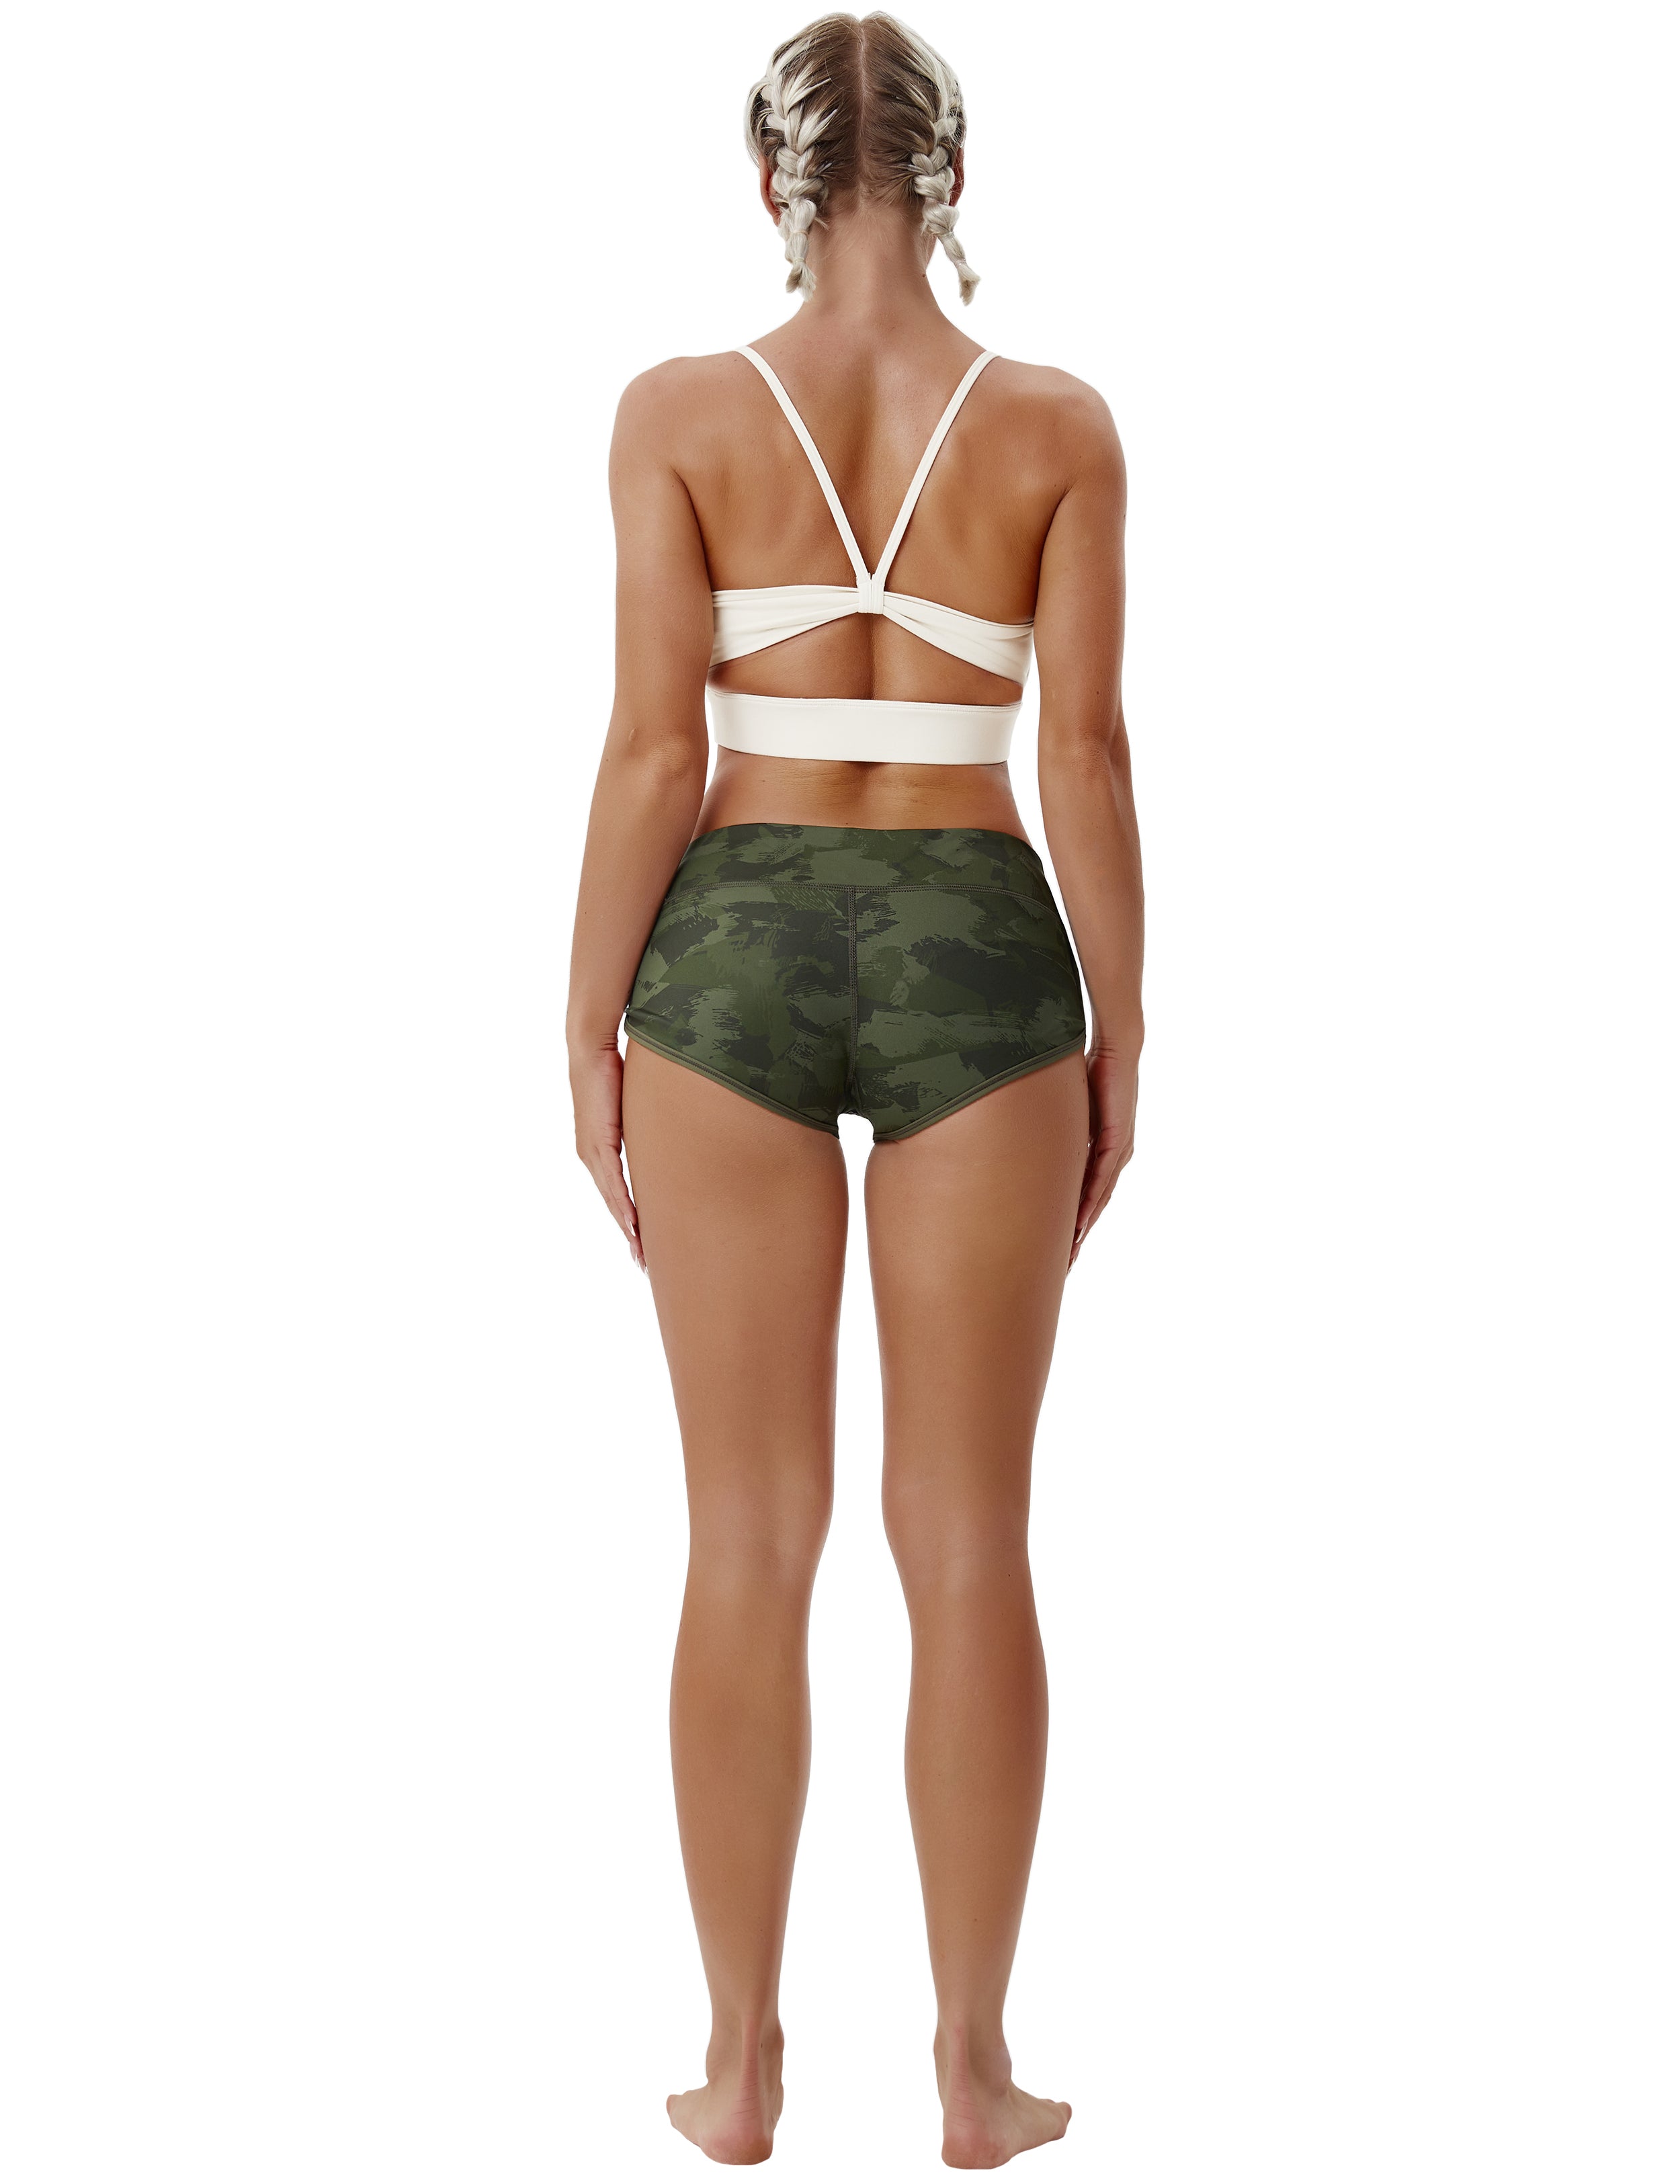 Printed Booty Golf Shorts green brushcamo Sleek, soft, smooth and totally comfortable: our newest sexy style is here. Softest-ever fabric High elasticity High density 4-way stretch Fabric doesn't attract lint easily No see-through Moisture-wicking Machine wash 78% Polyester, 22% Spandex